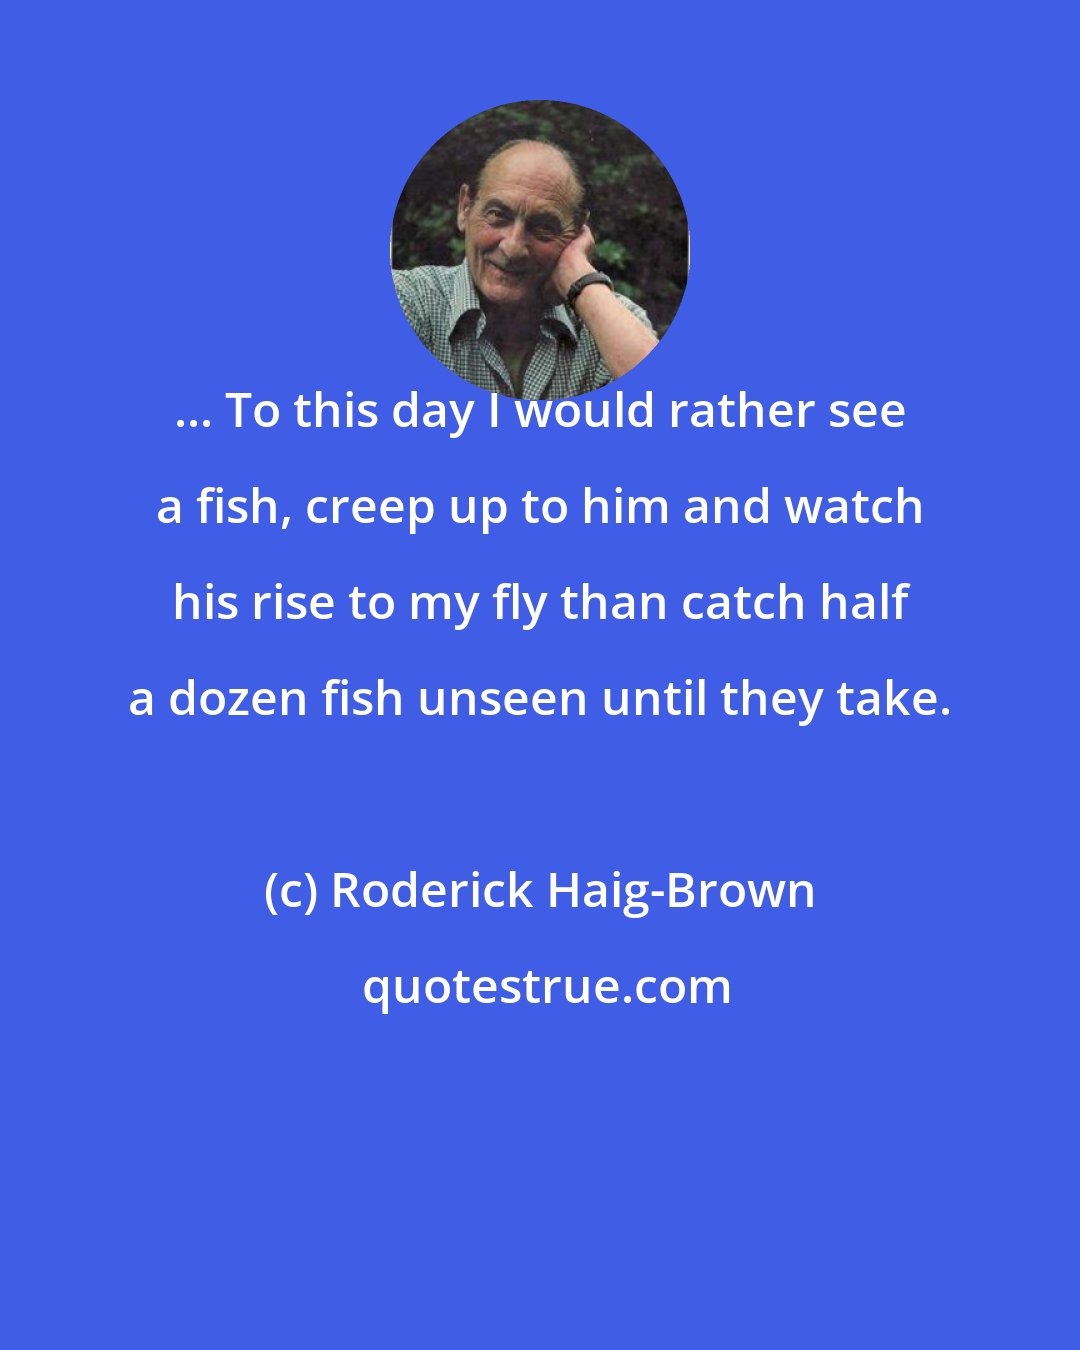 Roderick Haig-Brown: ... To this day I would rather see a fish, creep up to him and watch his rise to my fly than catch half a dozen fish unseen until they take.